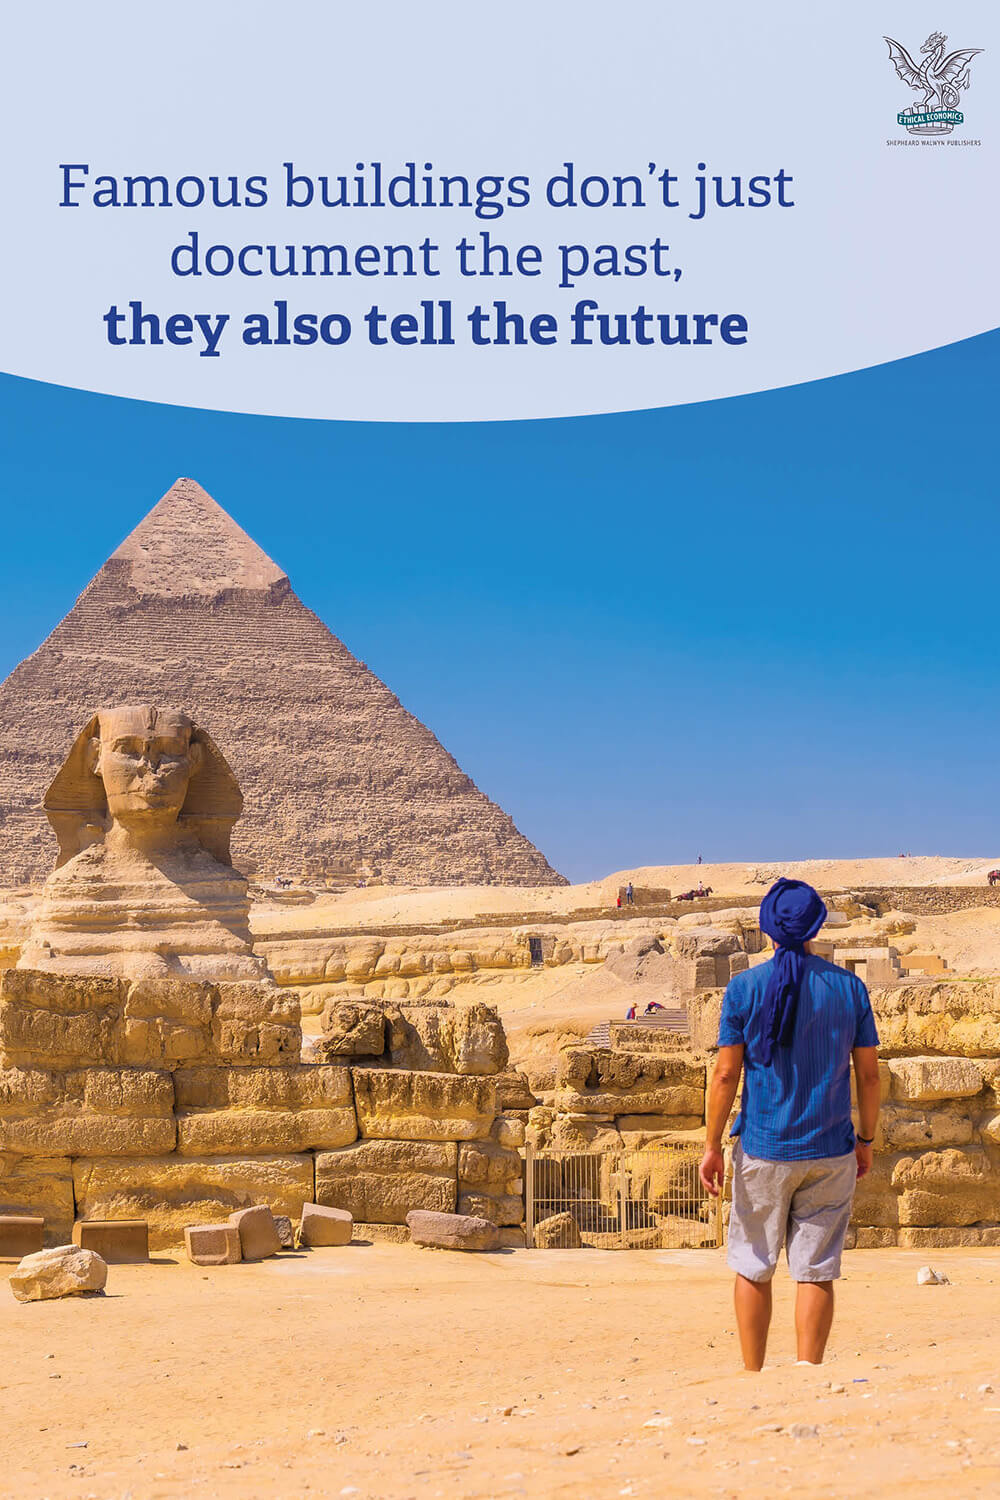 Image of the Pyramids of Giza - Famous buildings don’t just document the past, they also tell the future - Ethical Economics Blog - Shepheard Walwyn